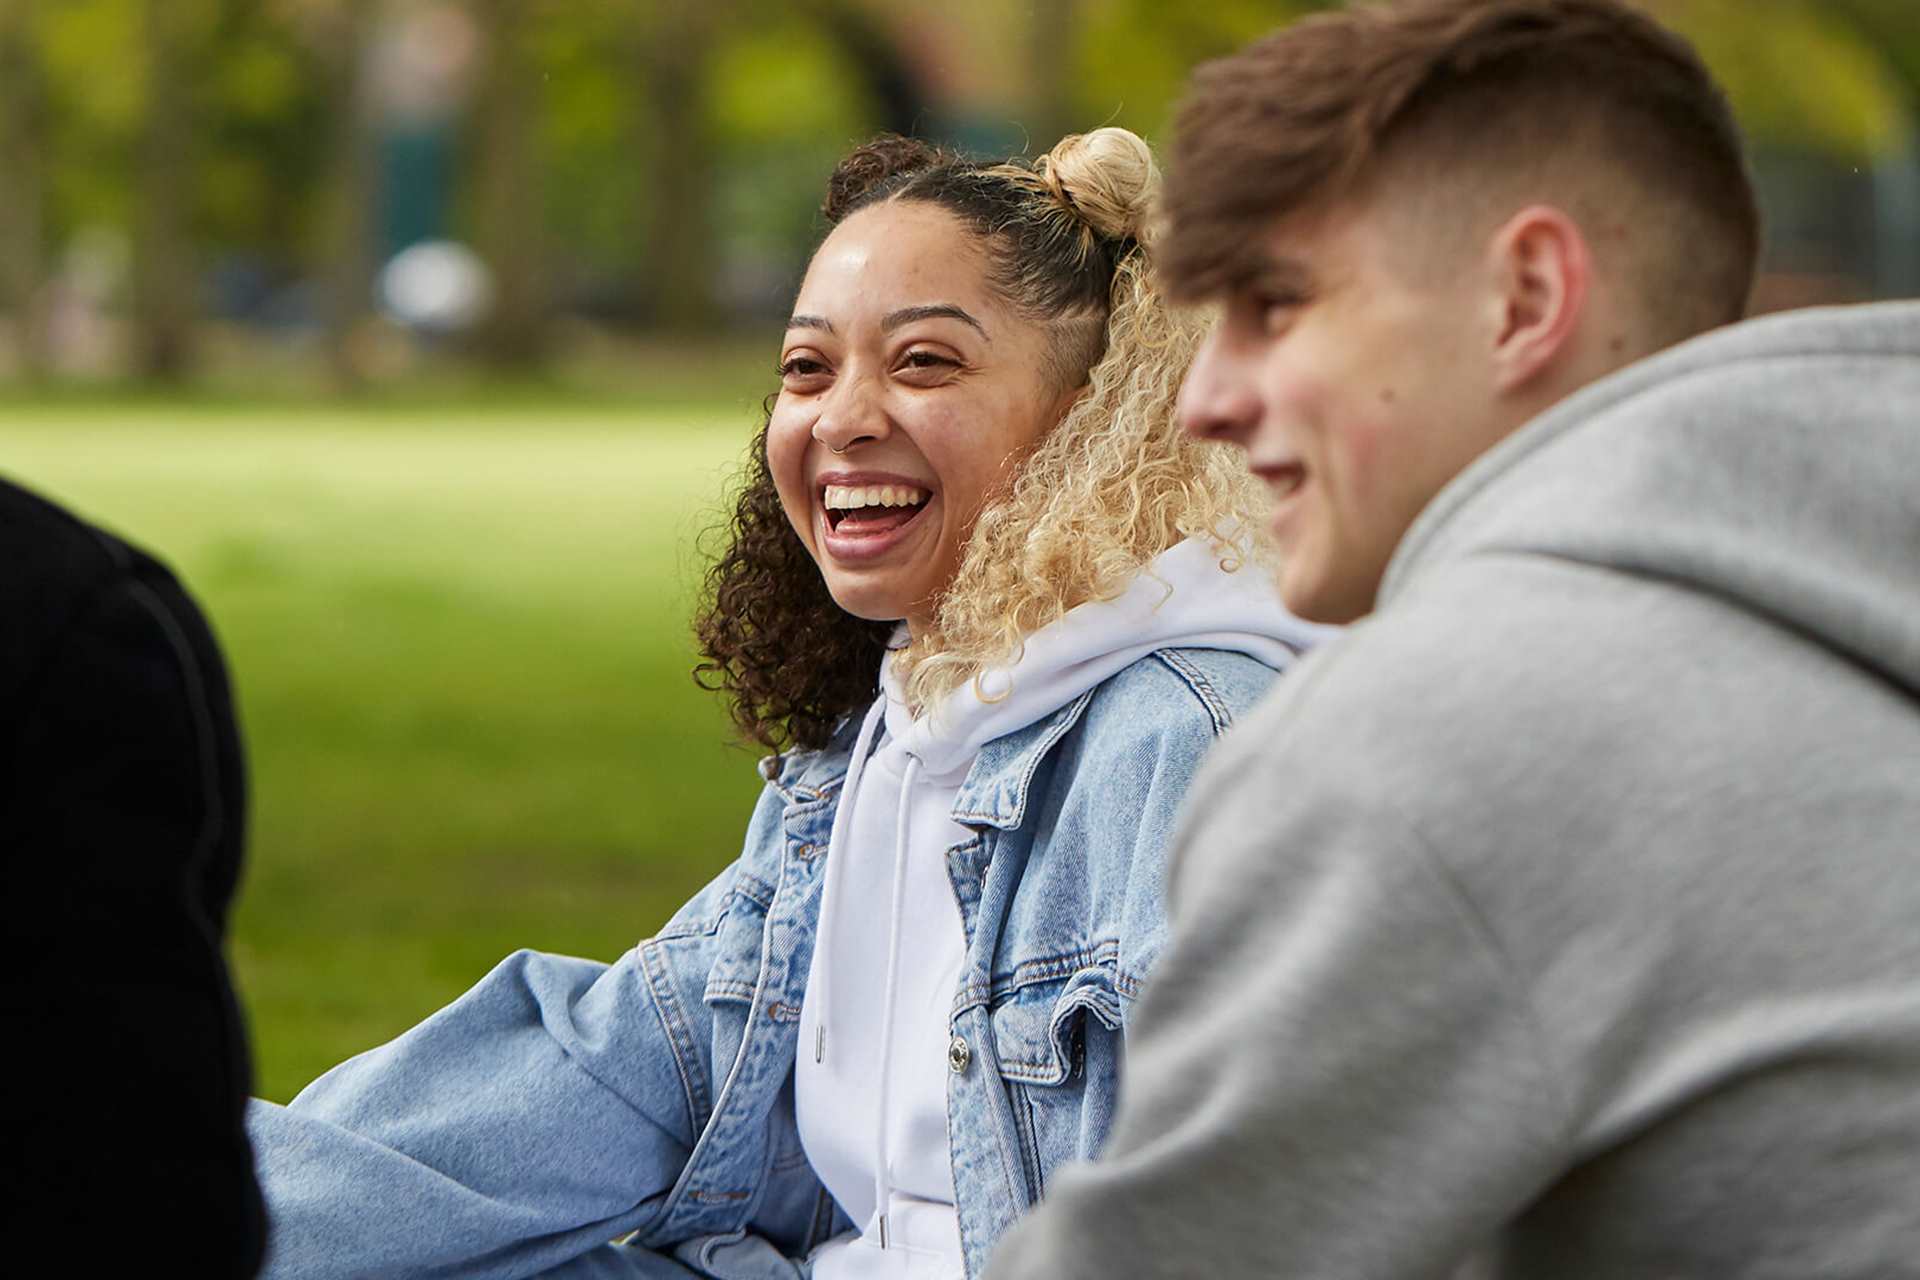 Three young people sit in a park, chatting. The person in the middle has curly hair and wears a denim jacket and is laughing, while looking at the two other young people. The person on the right is wearing a grey hoodie, the person on the left wears a black jacket.